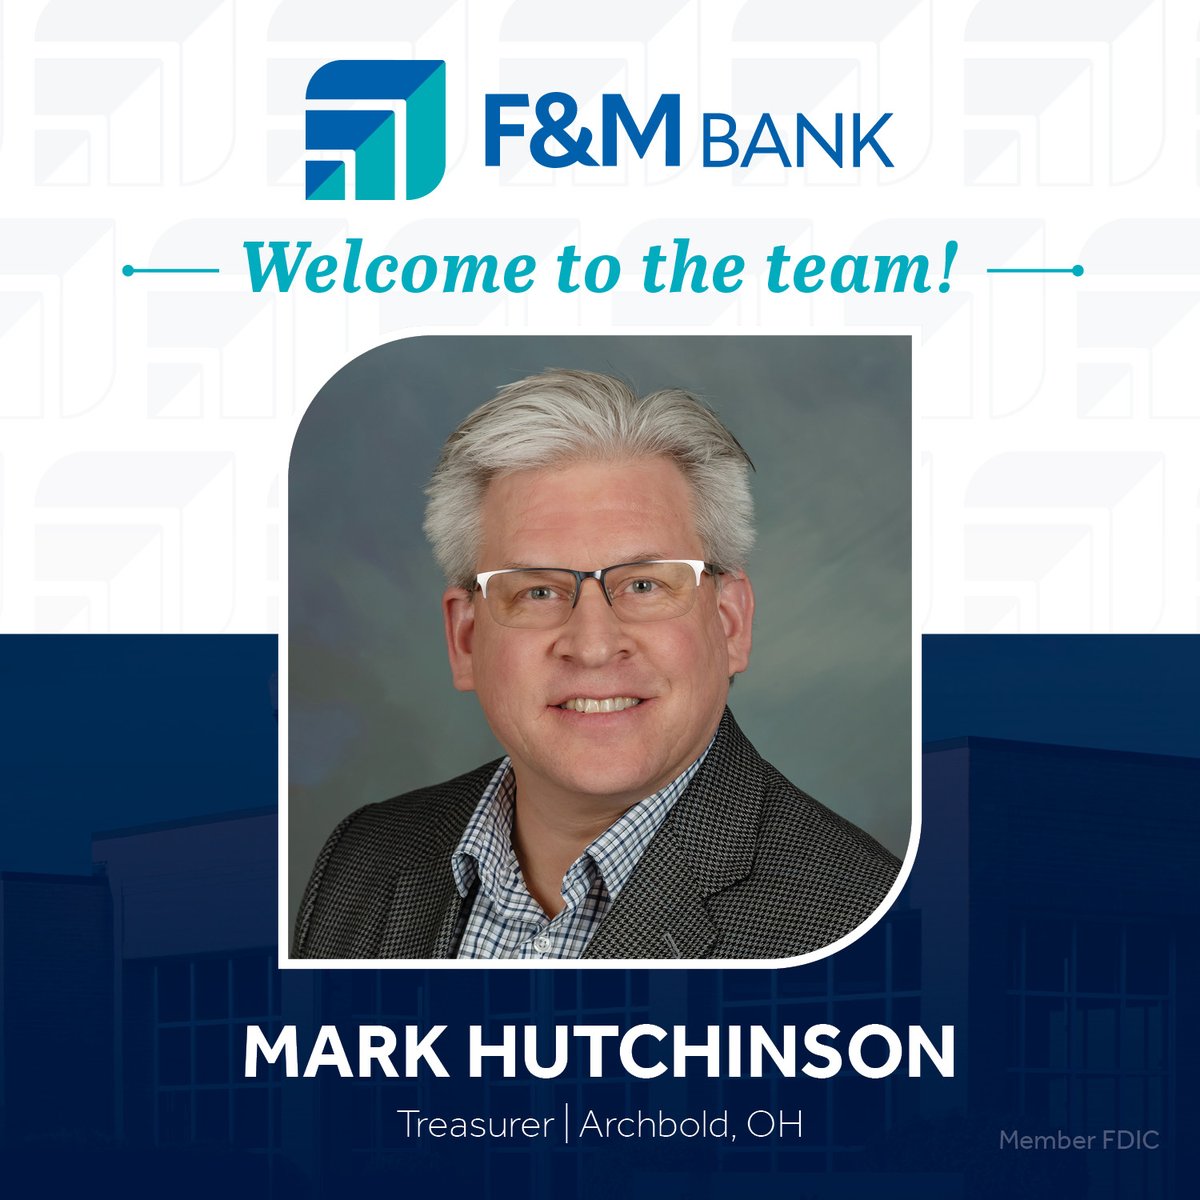 F&M Bank welcomes Mark Hutchinson as our new Treasurer. 
Mark will oversee certain financial operations including budgeting, planning, investing and other financial matters for the bank. 
F&M is happy to have you as a part of our team, Mark! 
#fmbank #bankingindustry